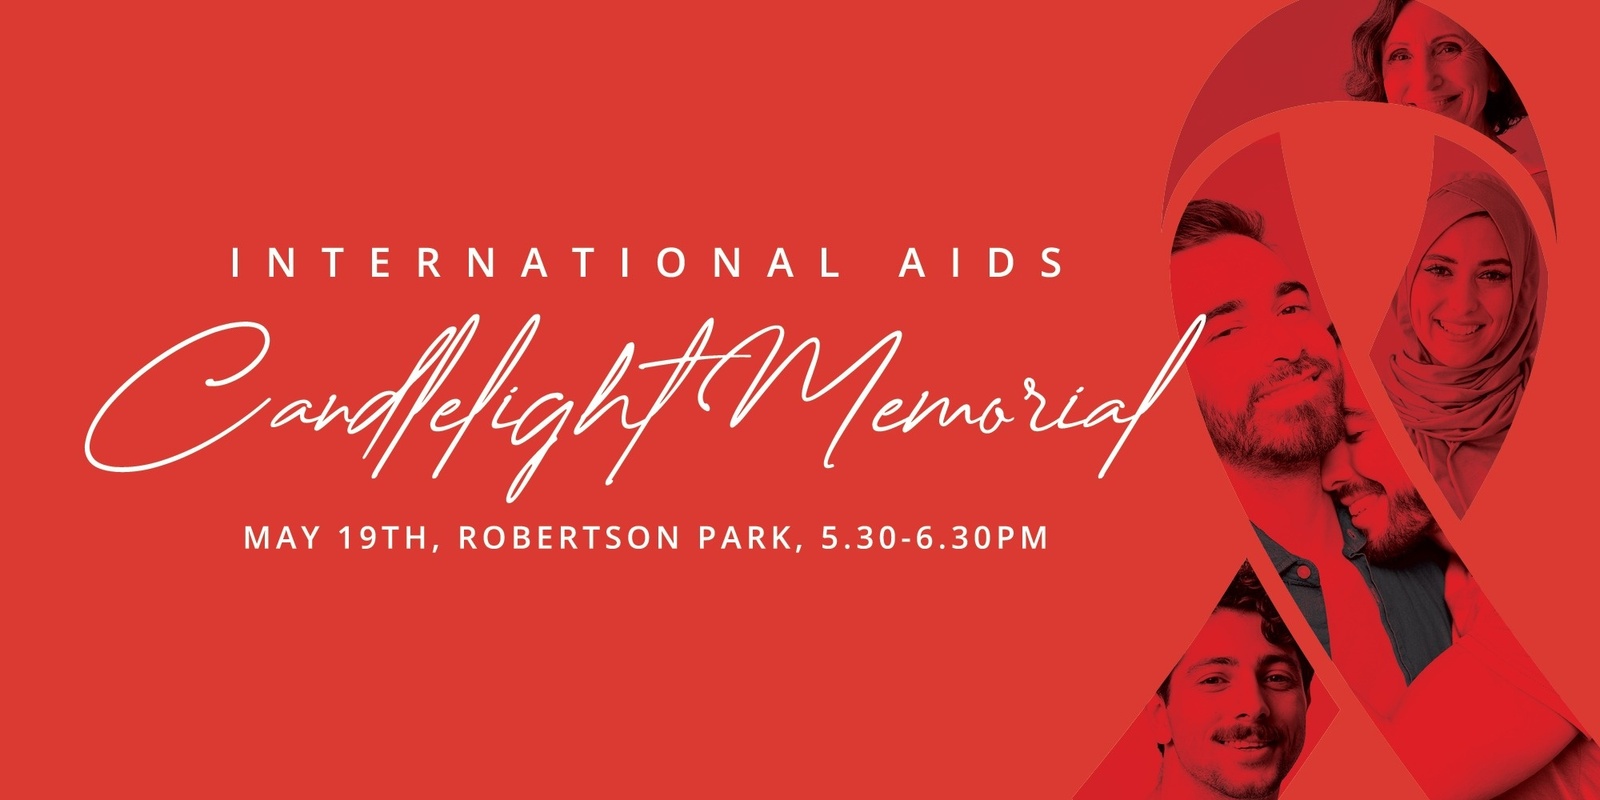 Banner image for International AIDS Candlelight Memorial